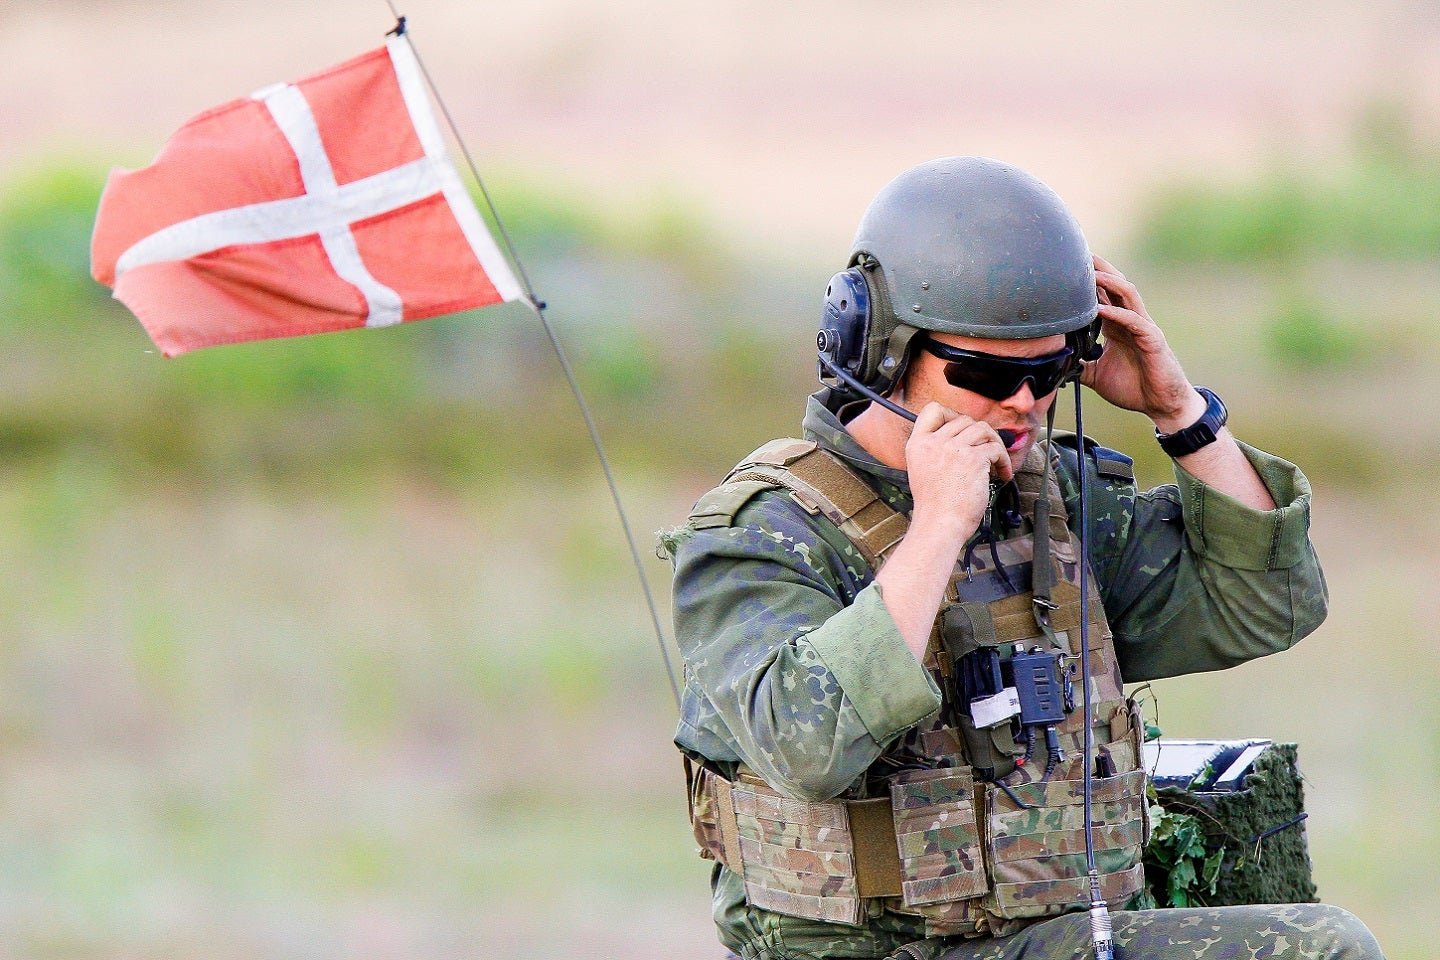 Denmark’s defence revival: Collaborations and capabilities